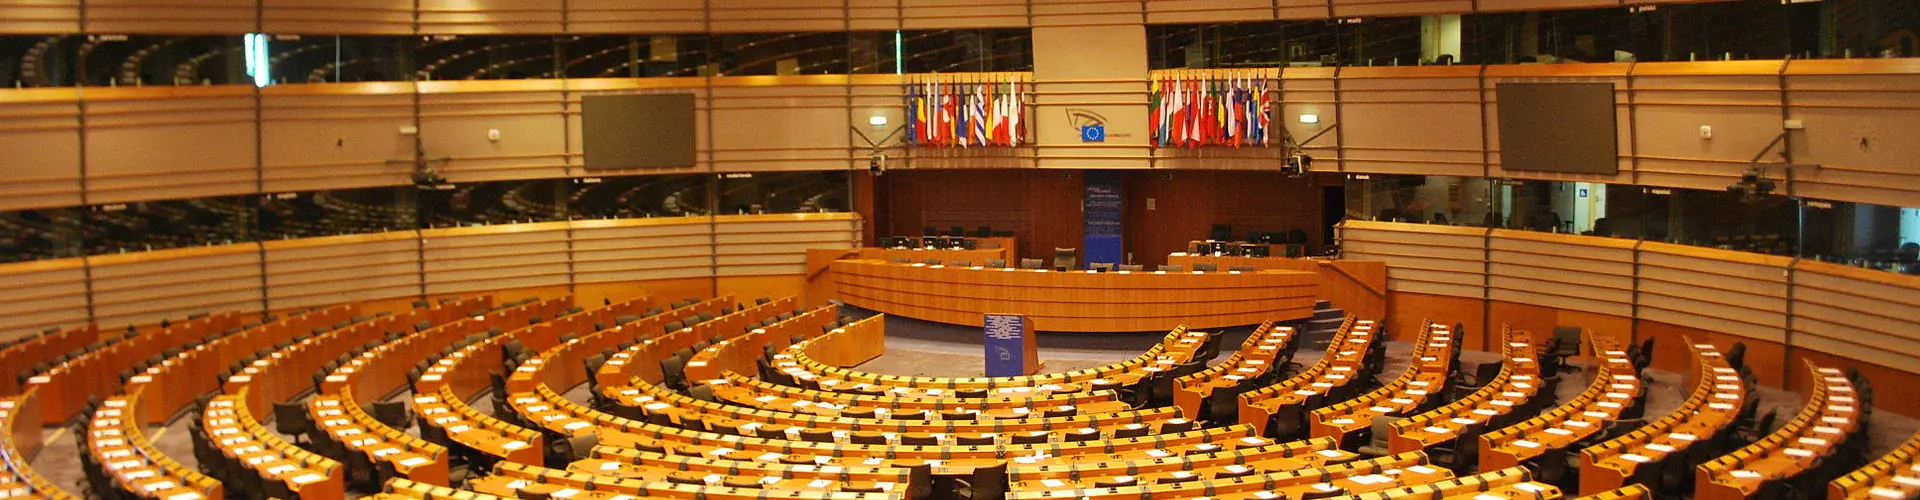 The hemicycle of the European Parliament in Brussels. (Credit: Ash Crow/Wikimedia)